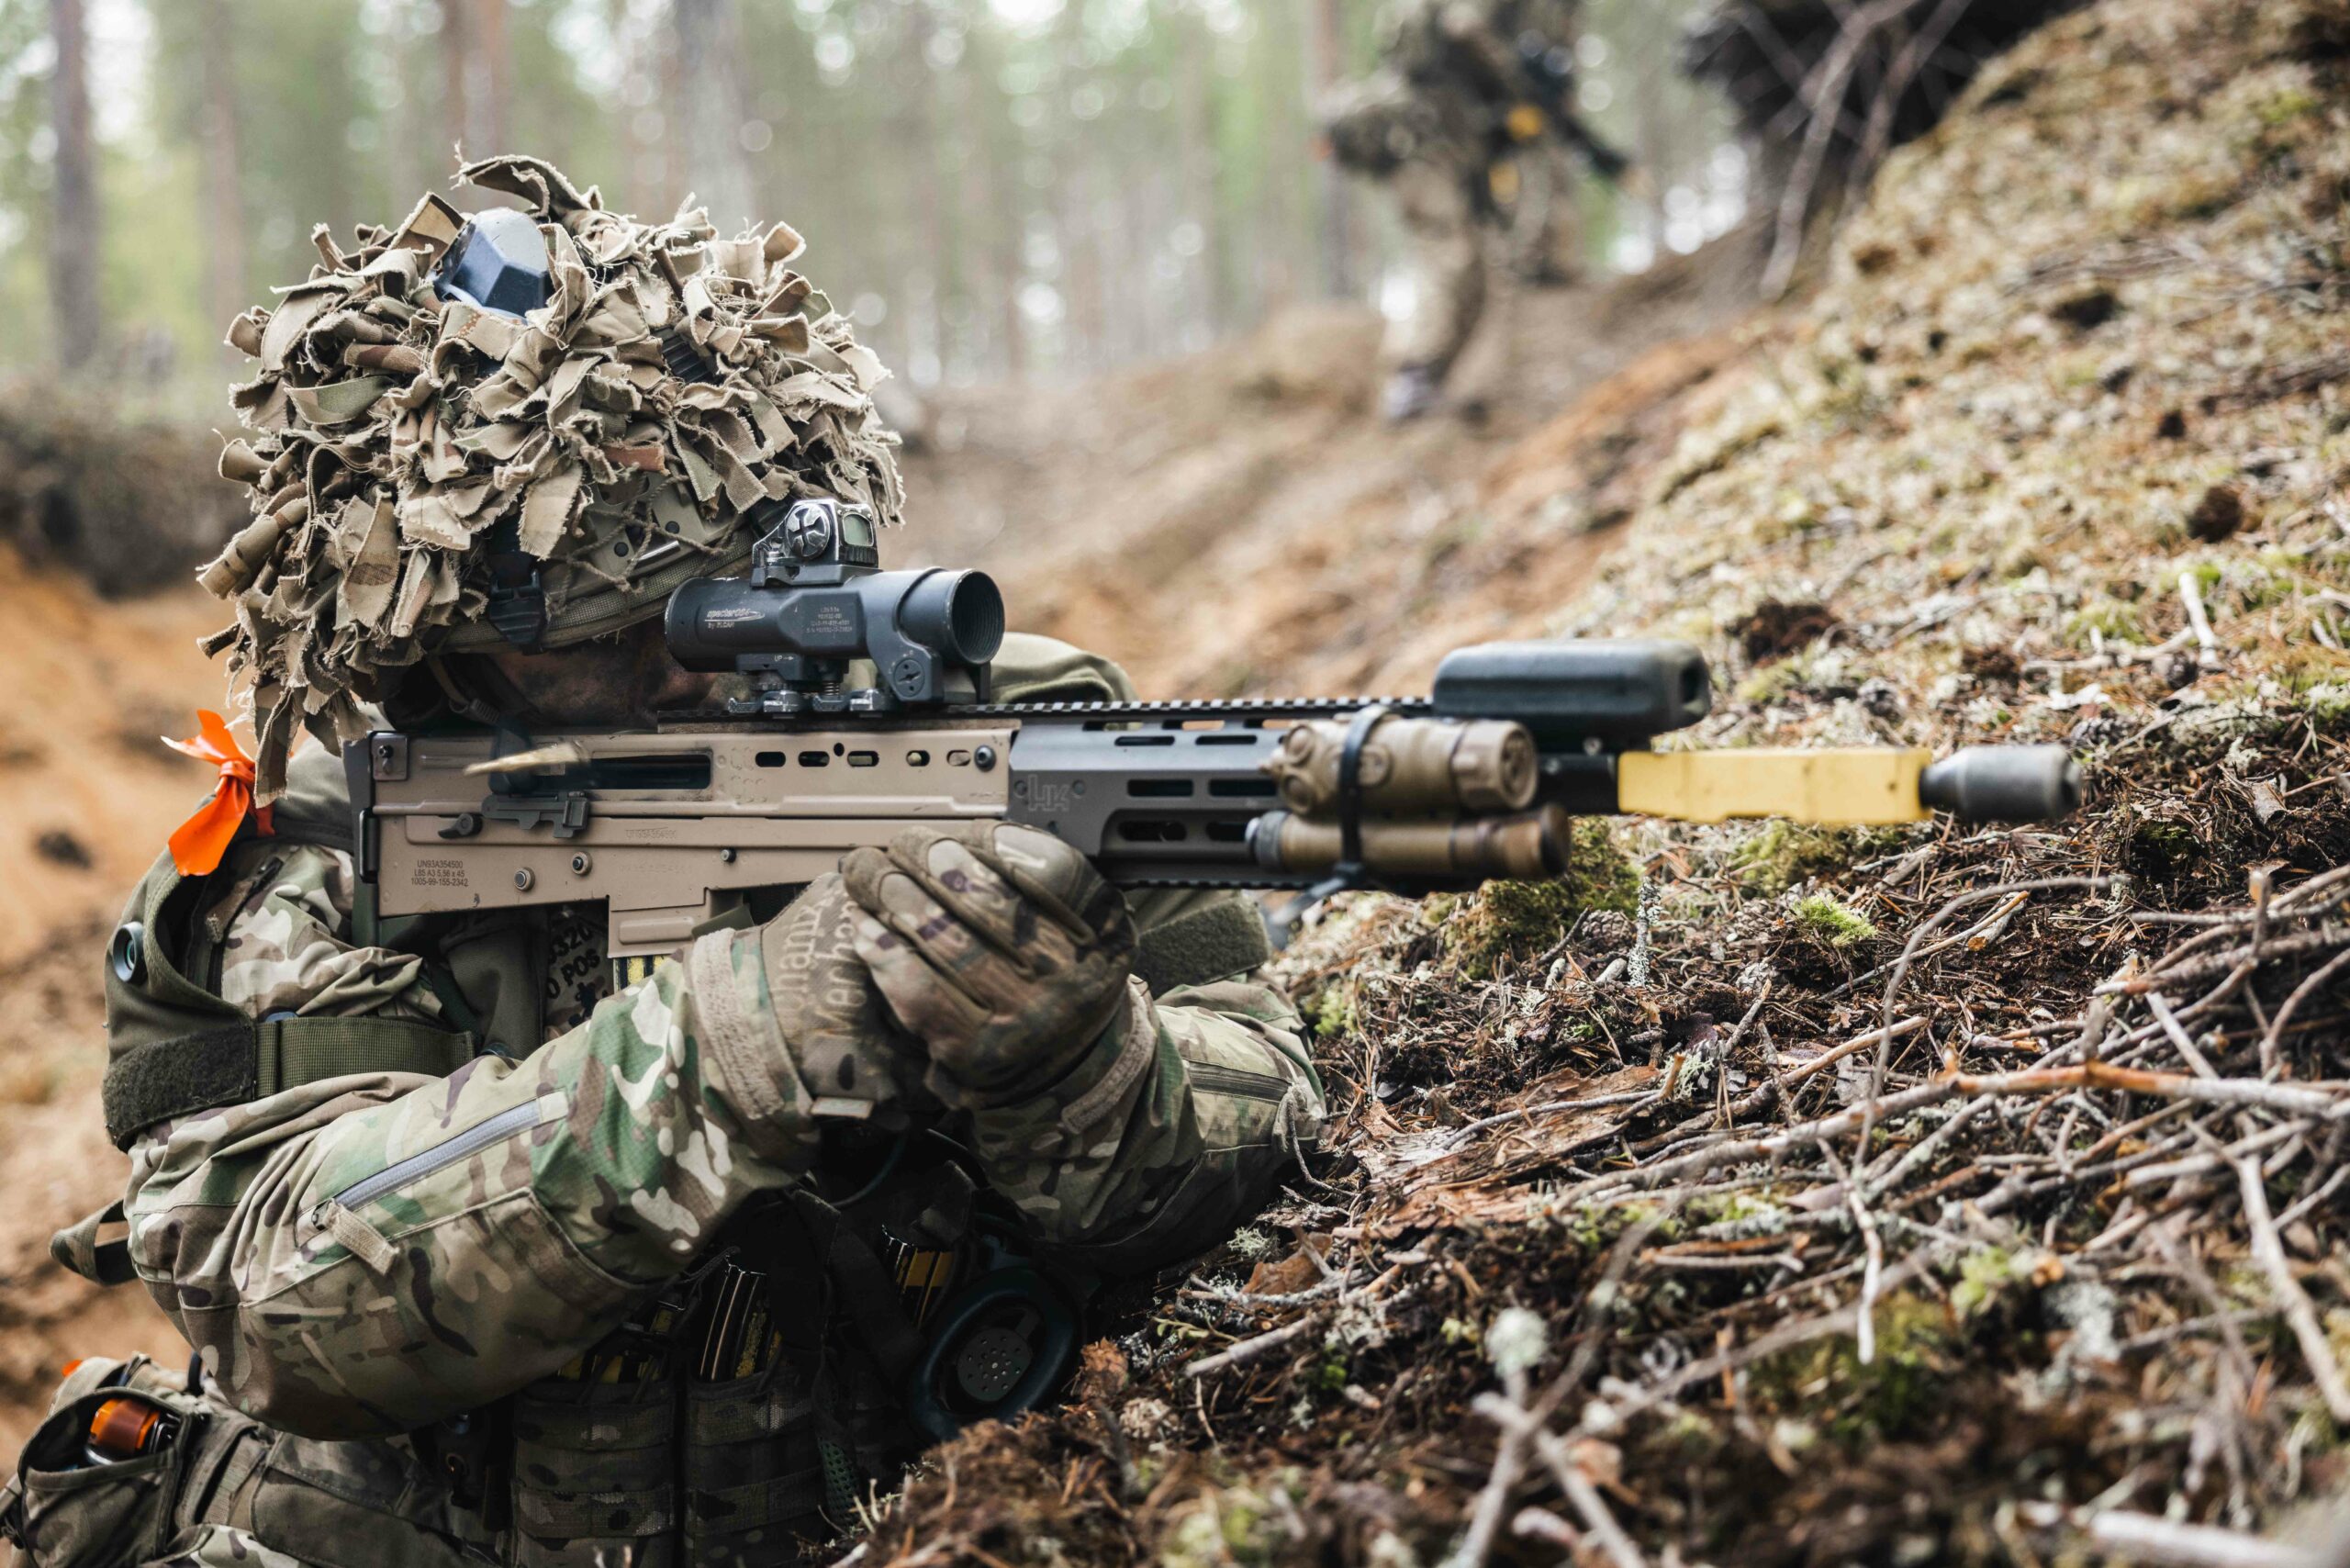 British soldier fires his SA-80 towards the enemy during the exercise. The Finnish Defence Forces (FDF) proudly announce Exercise NORTHERN FOREST 23 (NF23), a major military exercise led by the FDF and involving allied forces and JEF Participant Nations (PNs). Taking place during May and June 2023, NF23 is designed to enhance the capabilities of the Finnish troops and validate their readiness for future operations. As part of NF23, A Company Group from 5 RIFLES will be exercising as an Armoured Infantry Company within a Finnish battlegroup, operating alongside the Finnish Jaeger Corps and Border Guard. The exercise will be primarily held in the picturesque region of Rovaniemi, Finland, providing a challenging and realistic environment for the participating forces. NF23 is of great significance to the FDF as it serves as the main exercise for the year, aiming to thoroughly assess and validate the Finnish troops' skills and preparedness. By conducting joint training exercises with allied forces and JEF PNs, the FDF aims to strengthen cooperation, interoperability, and shared understanding among the participating nations. During the exercise, the Finnish Defence Forces will test a range of tactics, techniques, and procedures in various scenarios, including defensive and offensive operations, urban warfare, and border security. The focus will be on improving command and control structures, enhancing decision-making processes, and refining the interoperability of different units involved.